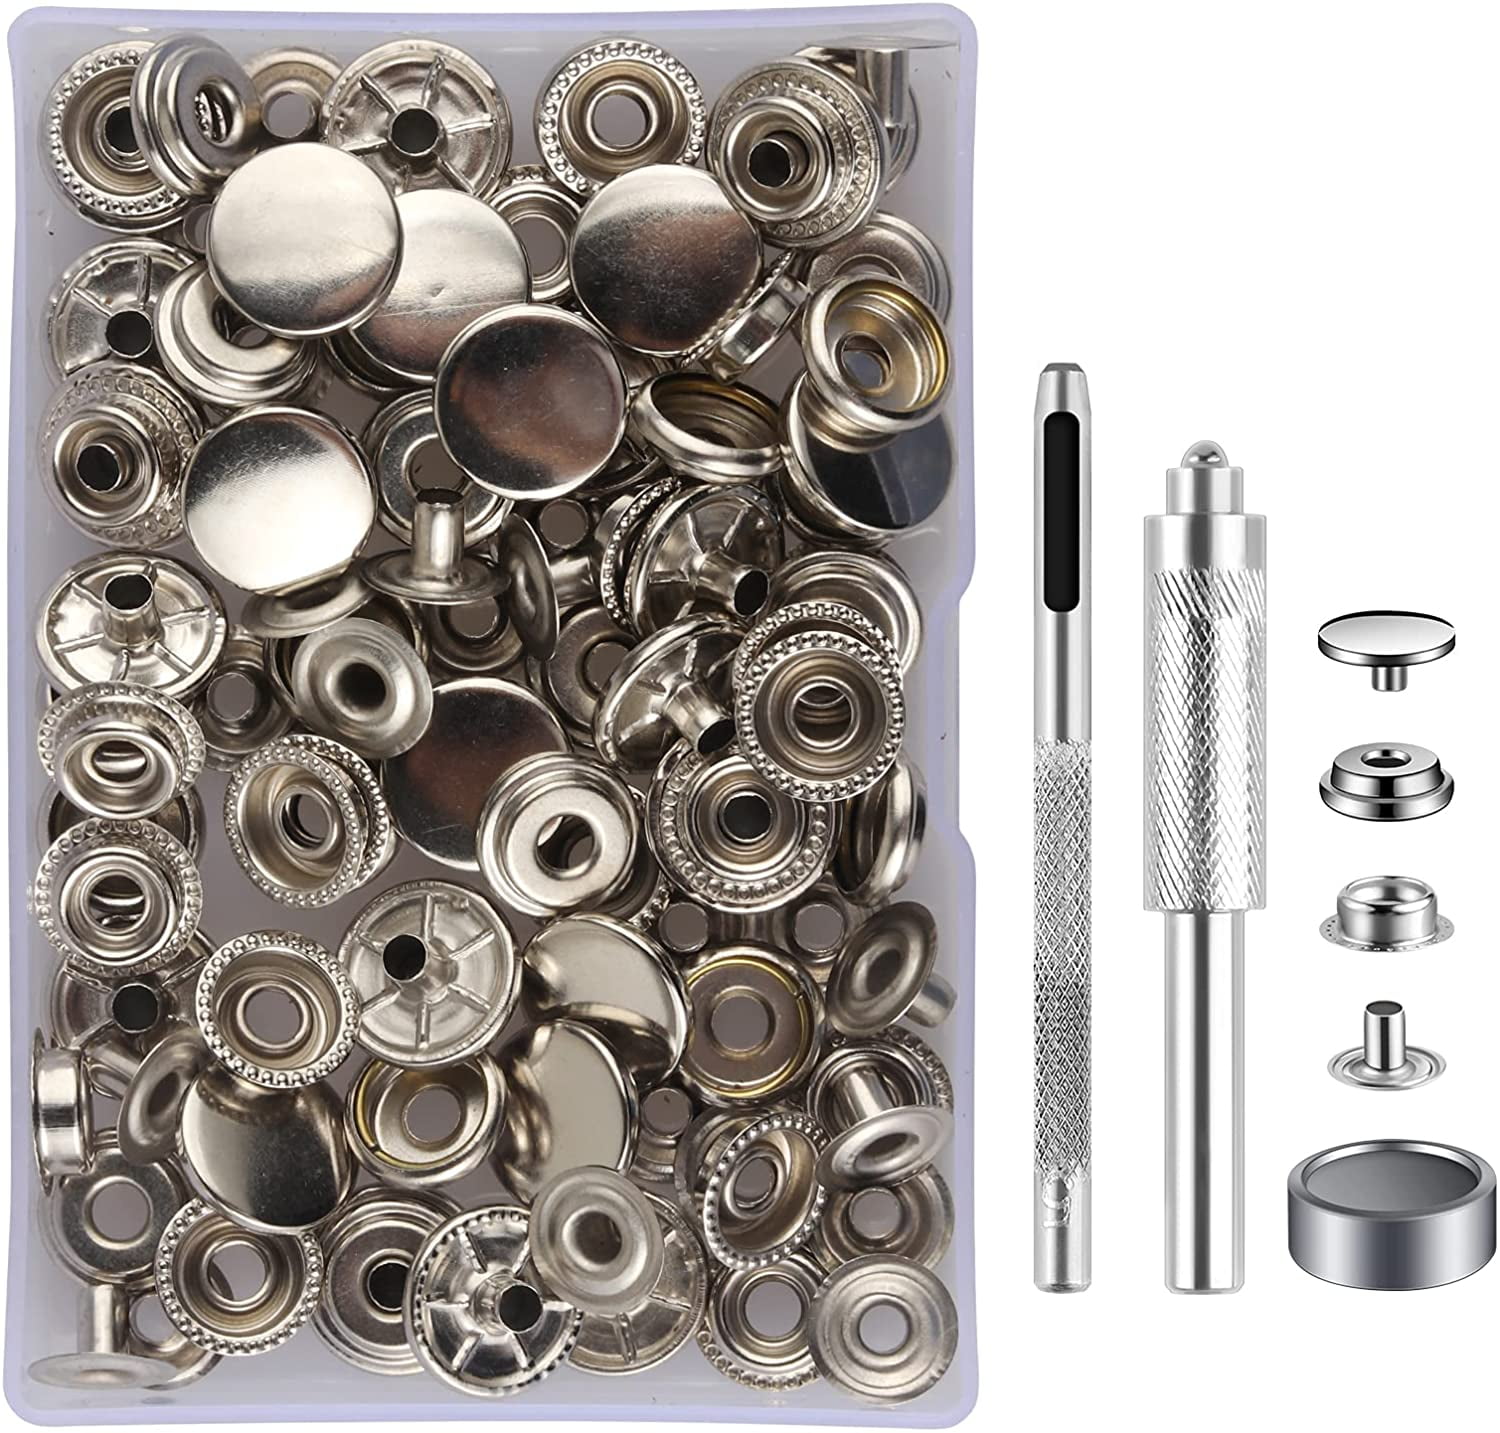 Urvrriu 200pcs Stainless Steel Snap Fastener Kit Durable Snaps Buttons Set Press Studs Cap with Fixing Tool and Pliers DIY Leather Craft for Clothing Sewing